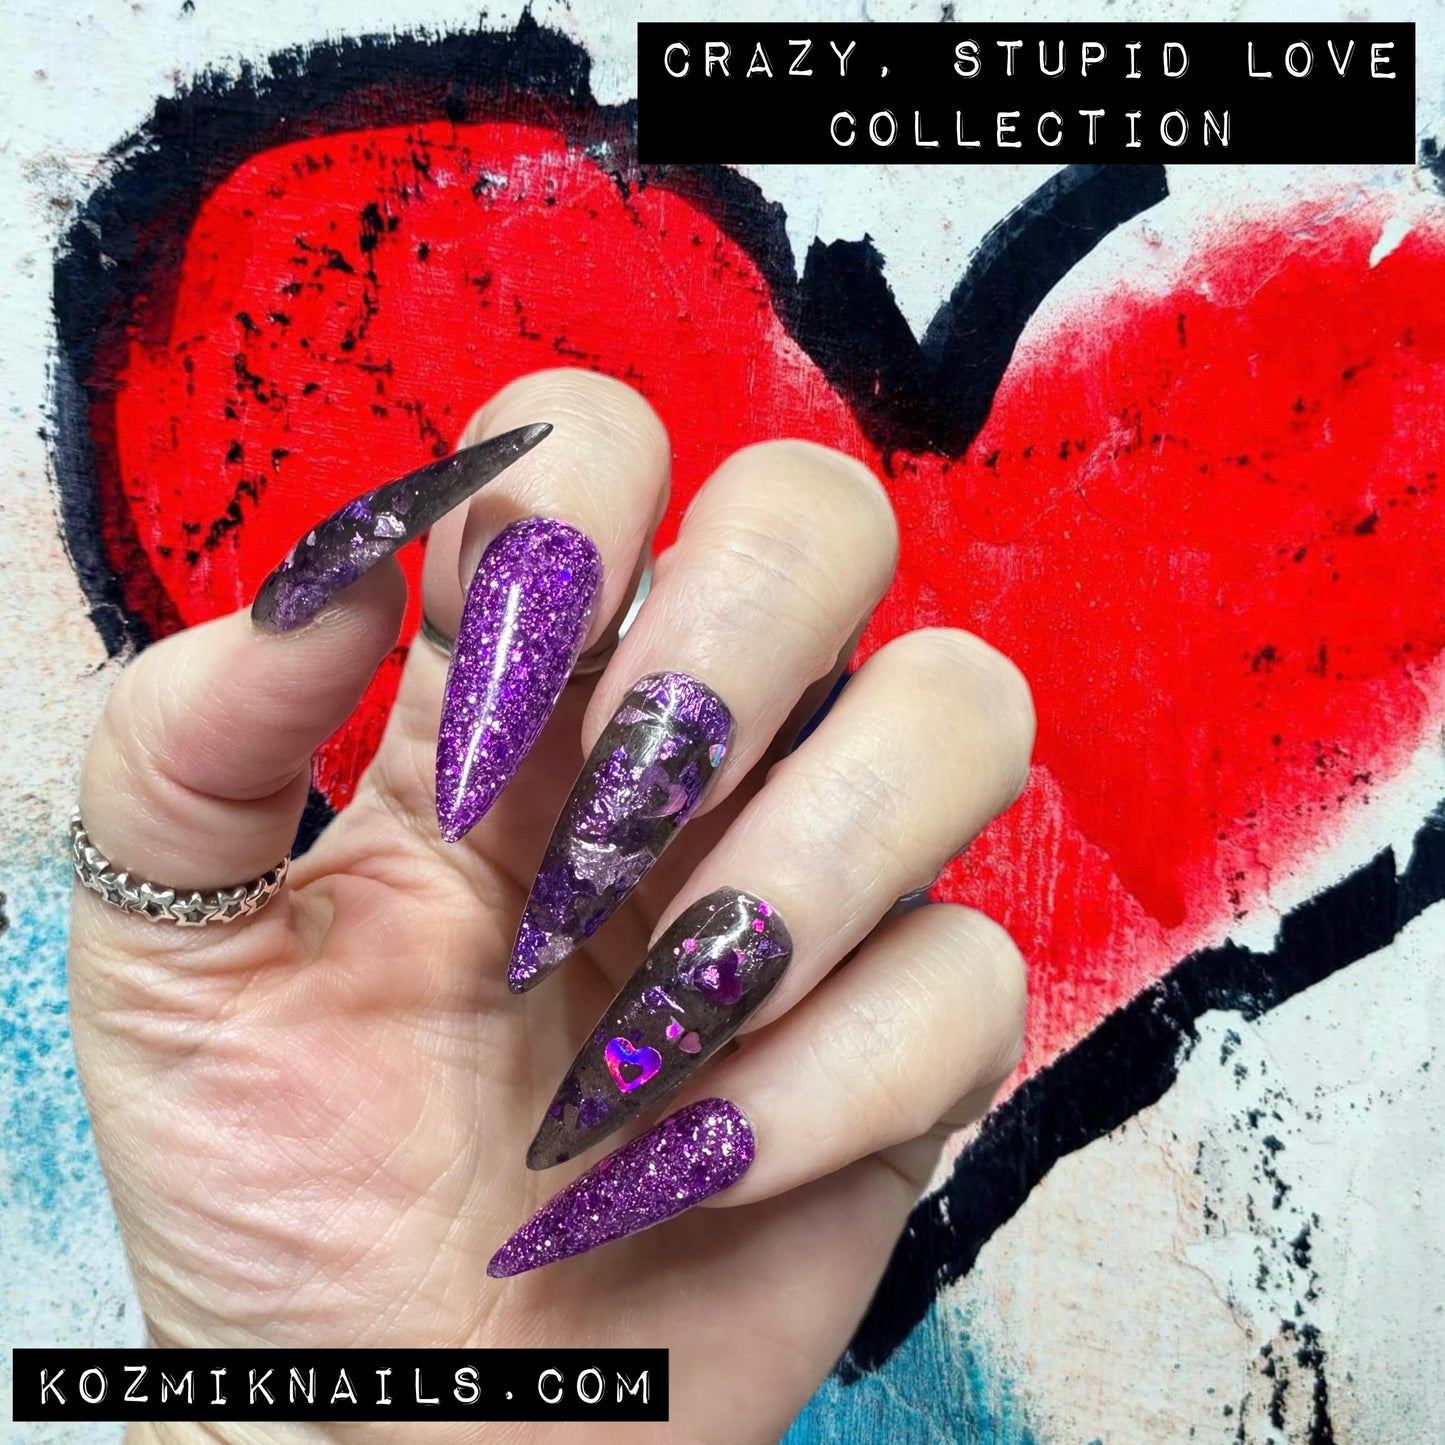 Crazy, Stupid Love Collection